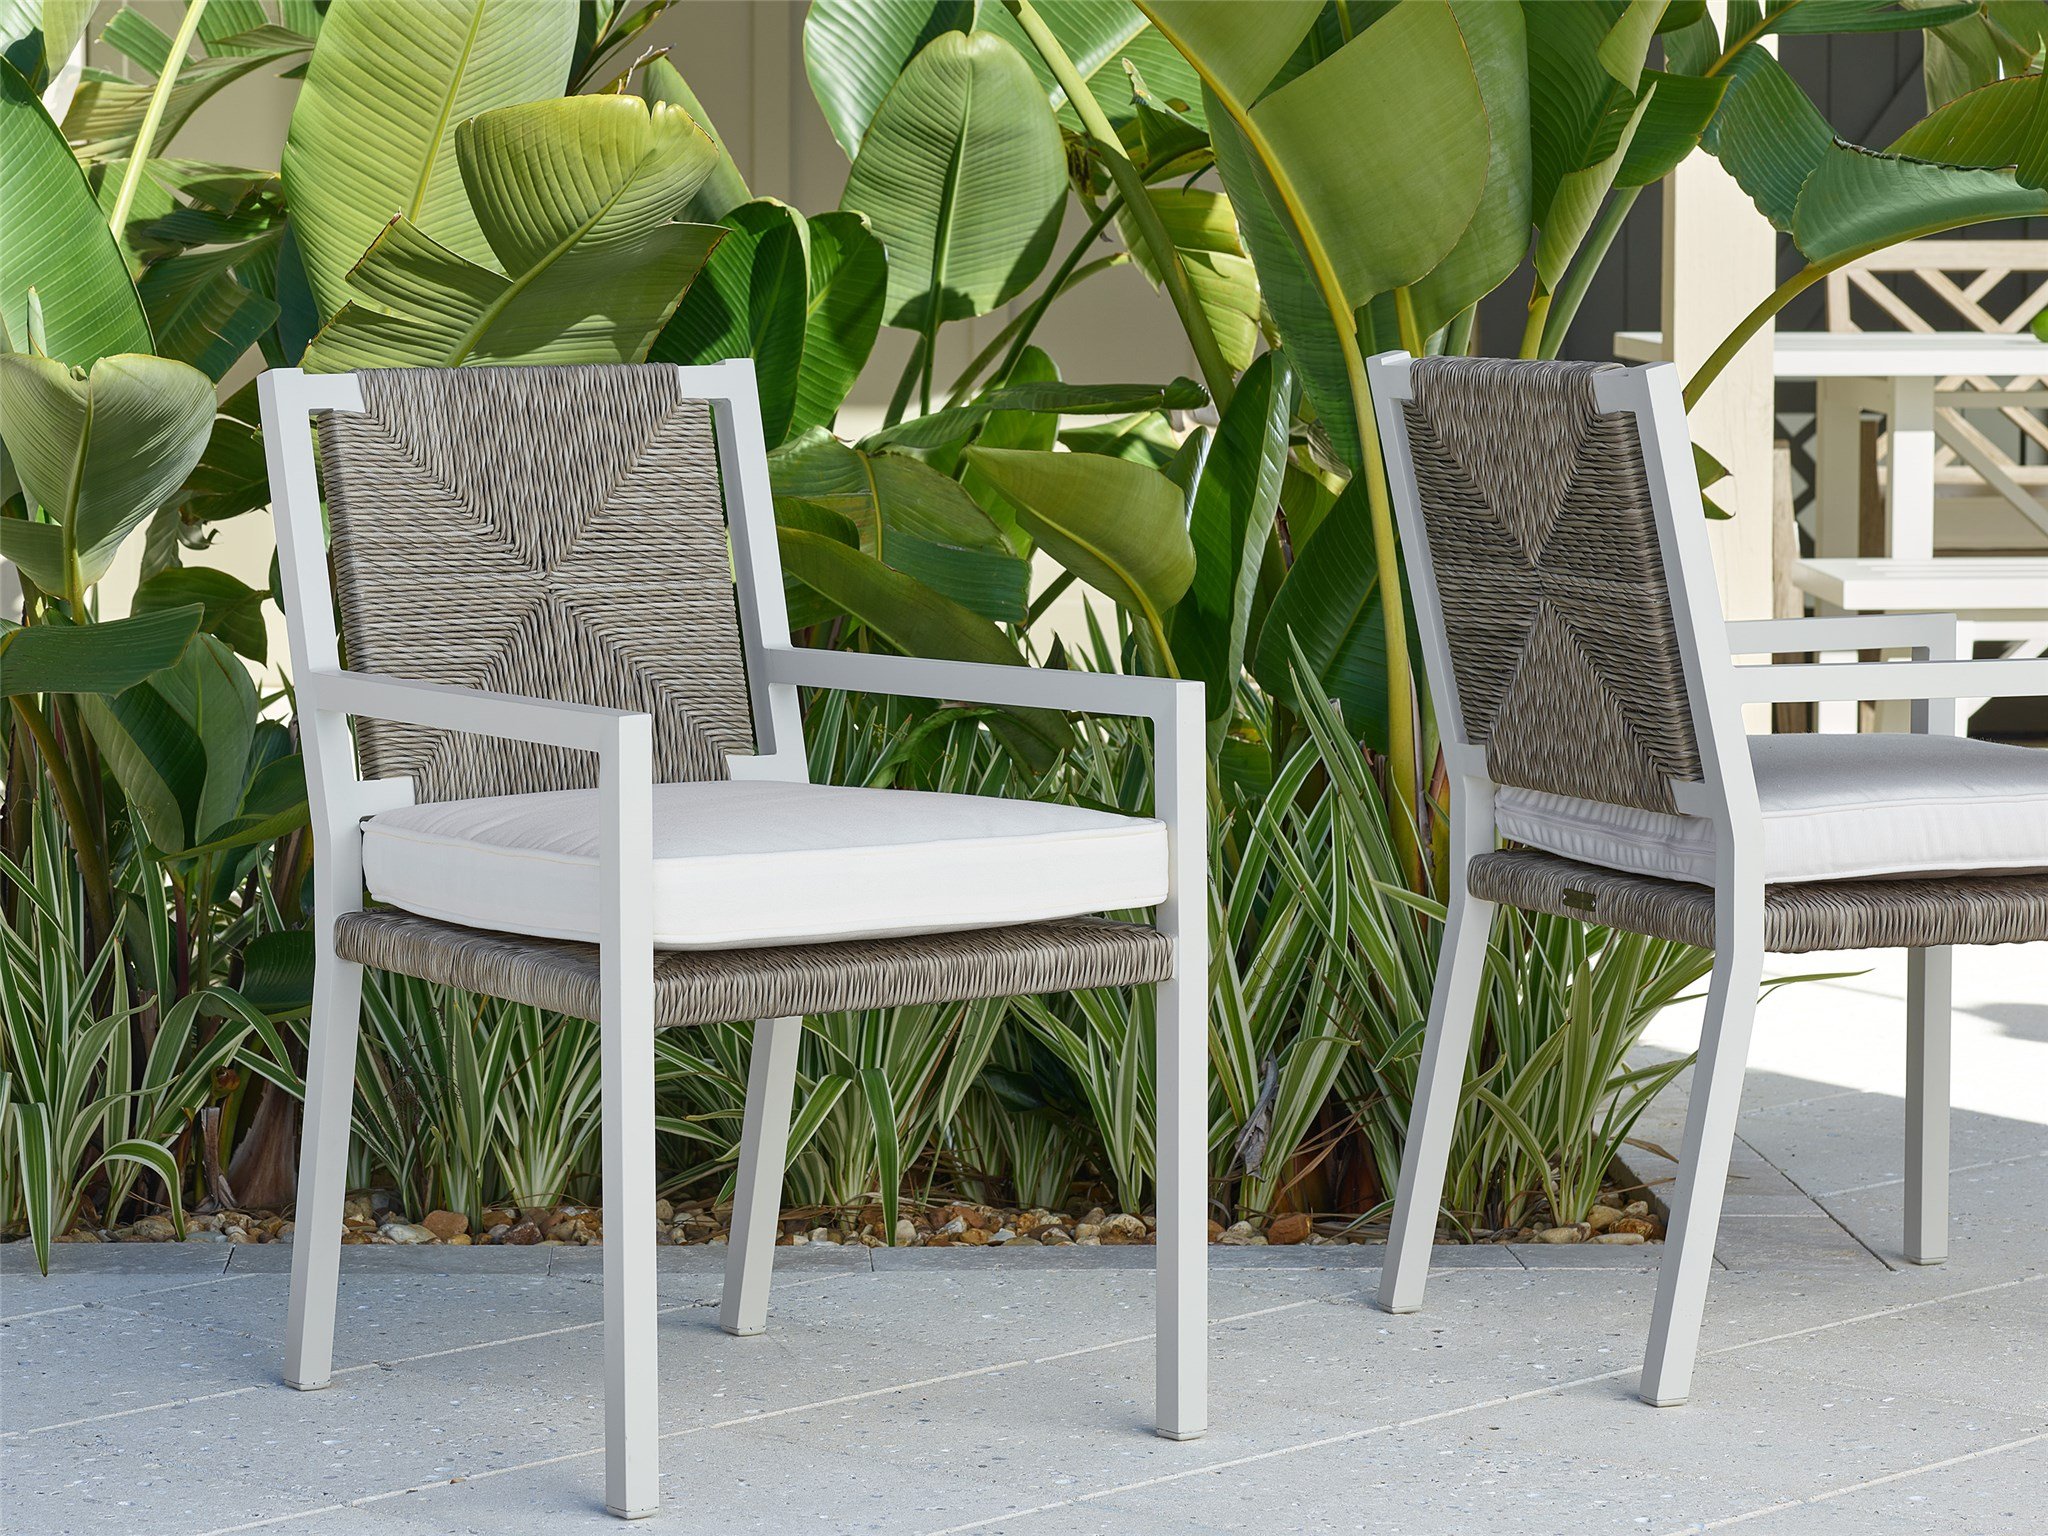 Tybee Dining Chair 